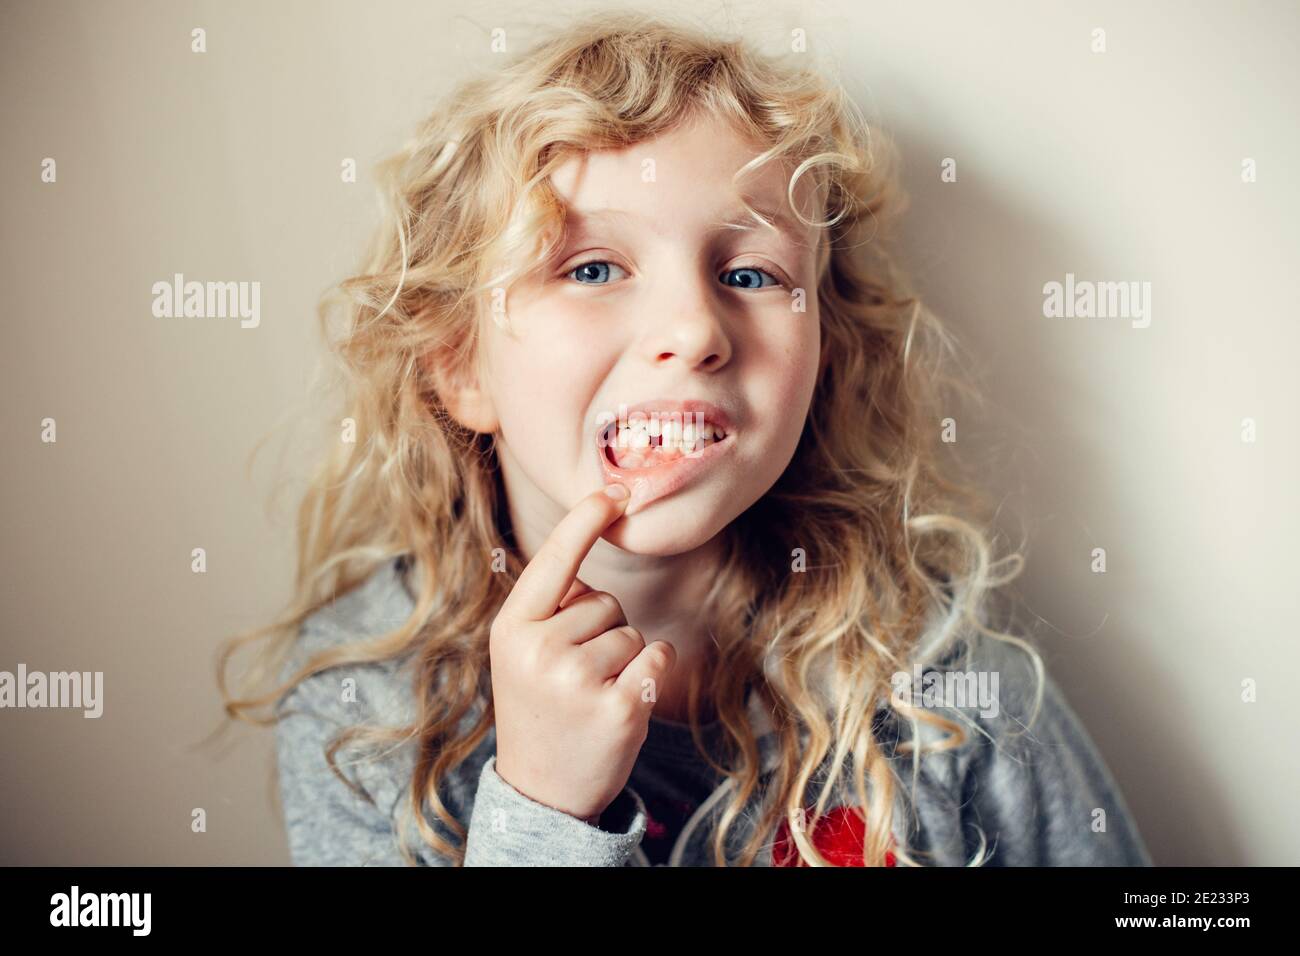 Cute Caucasian blonde girl showing her missing tooth in mouth. Proud child kid showing lost tooth and expecting a tooth fairy giving her money. Growin Stock Photo